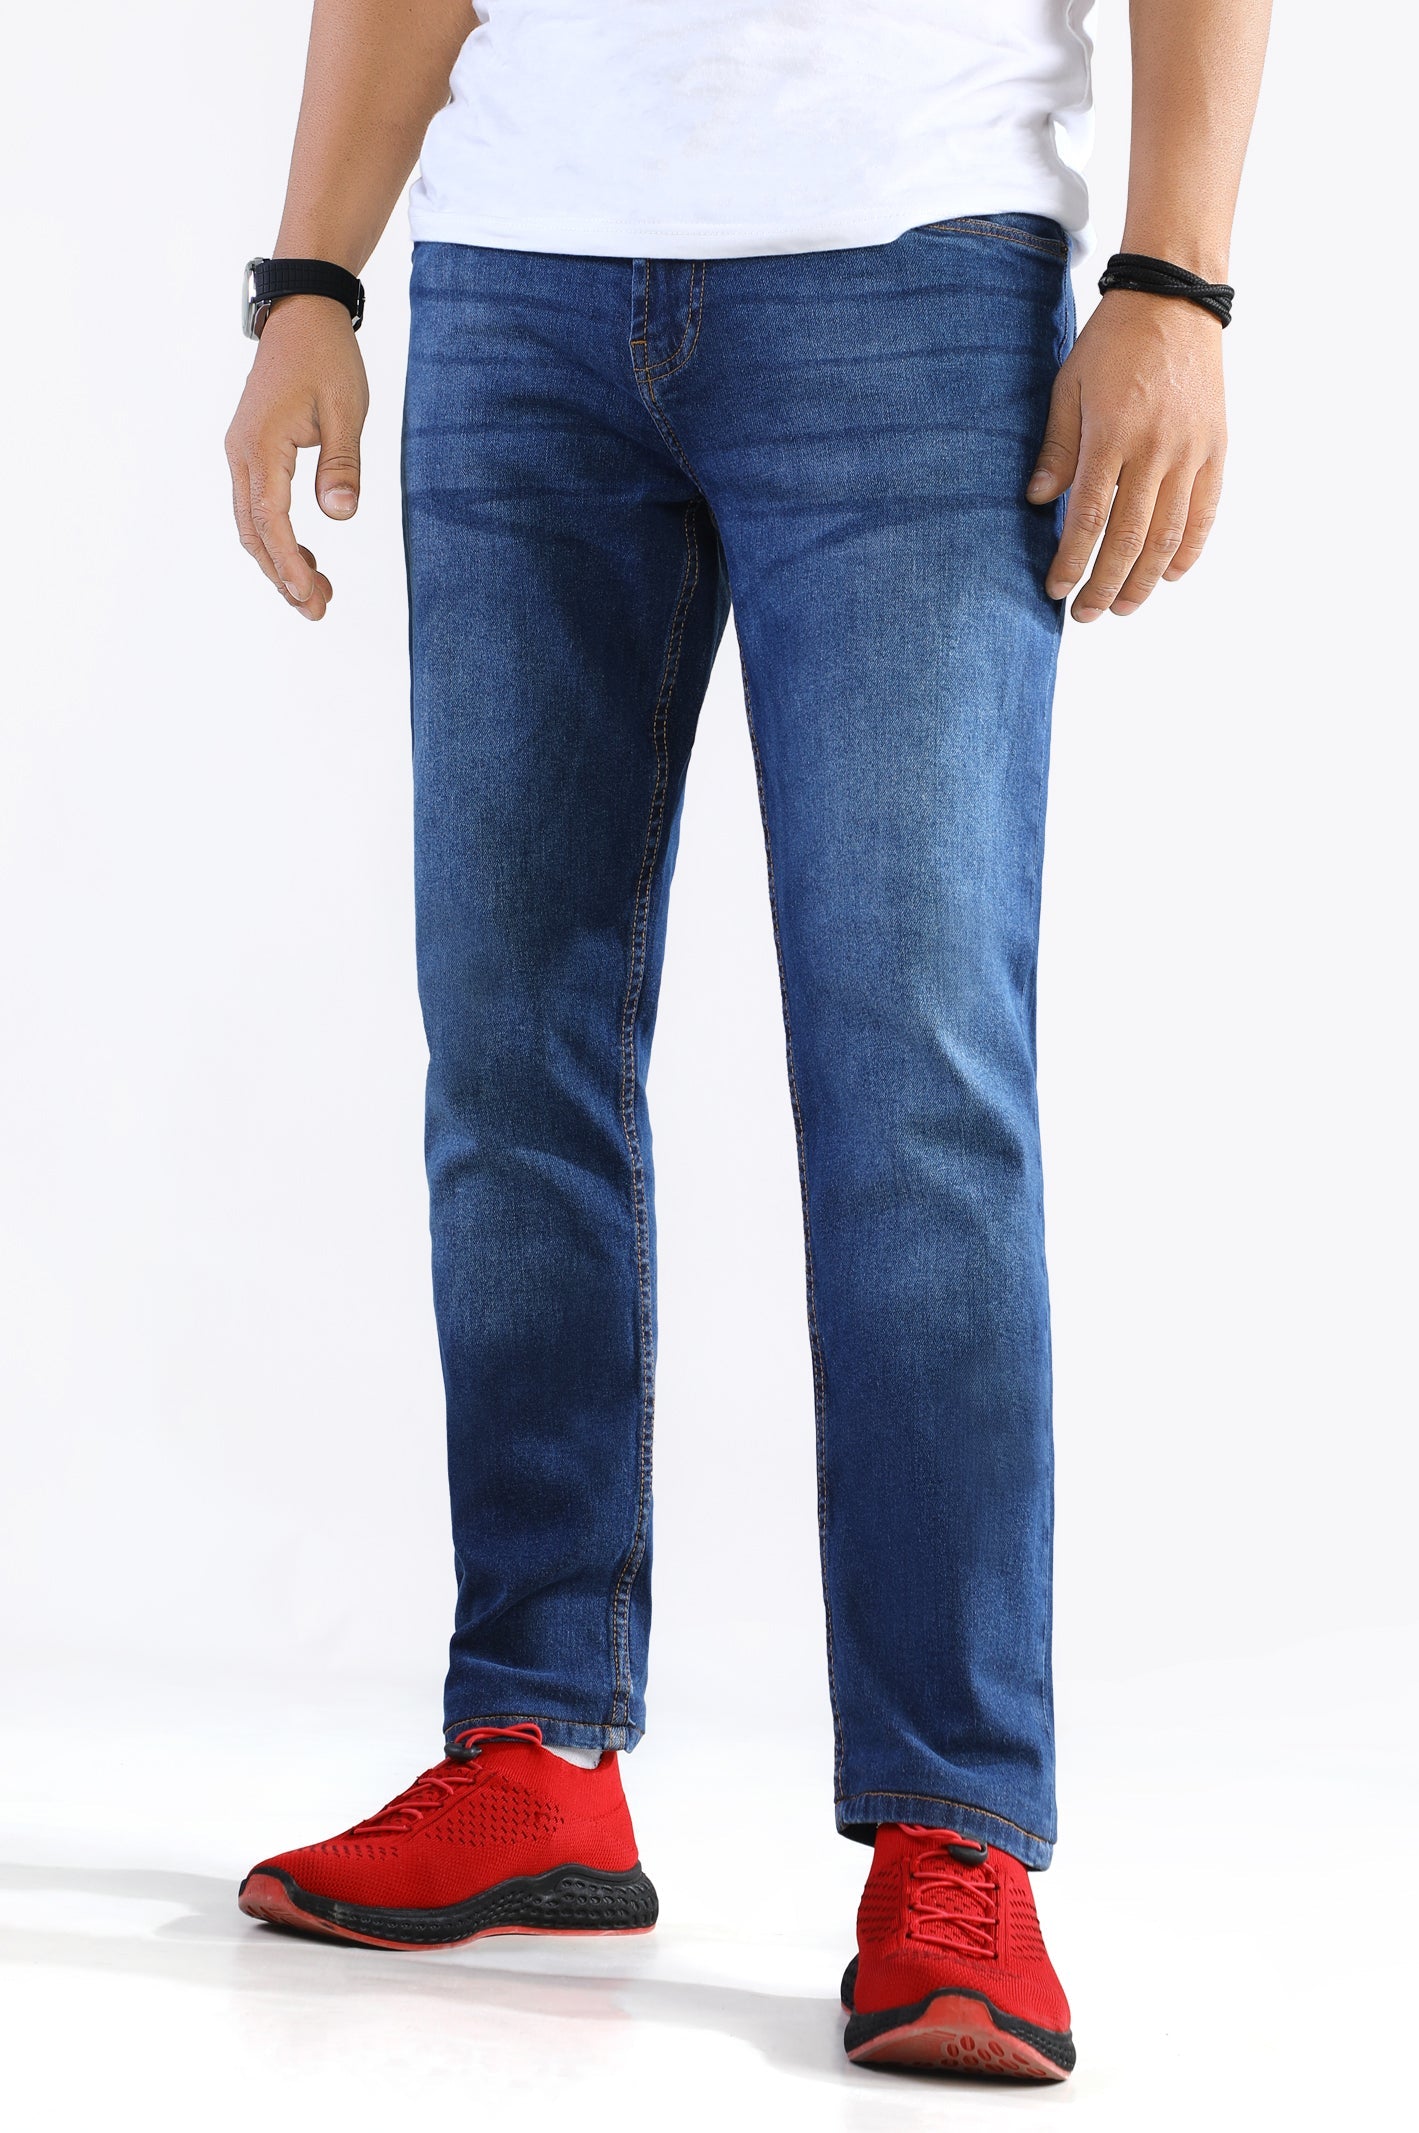 Indigo Smart Fit Jeans From Diners